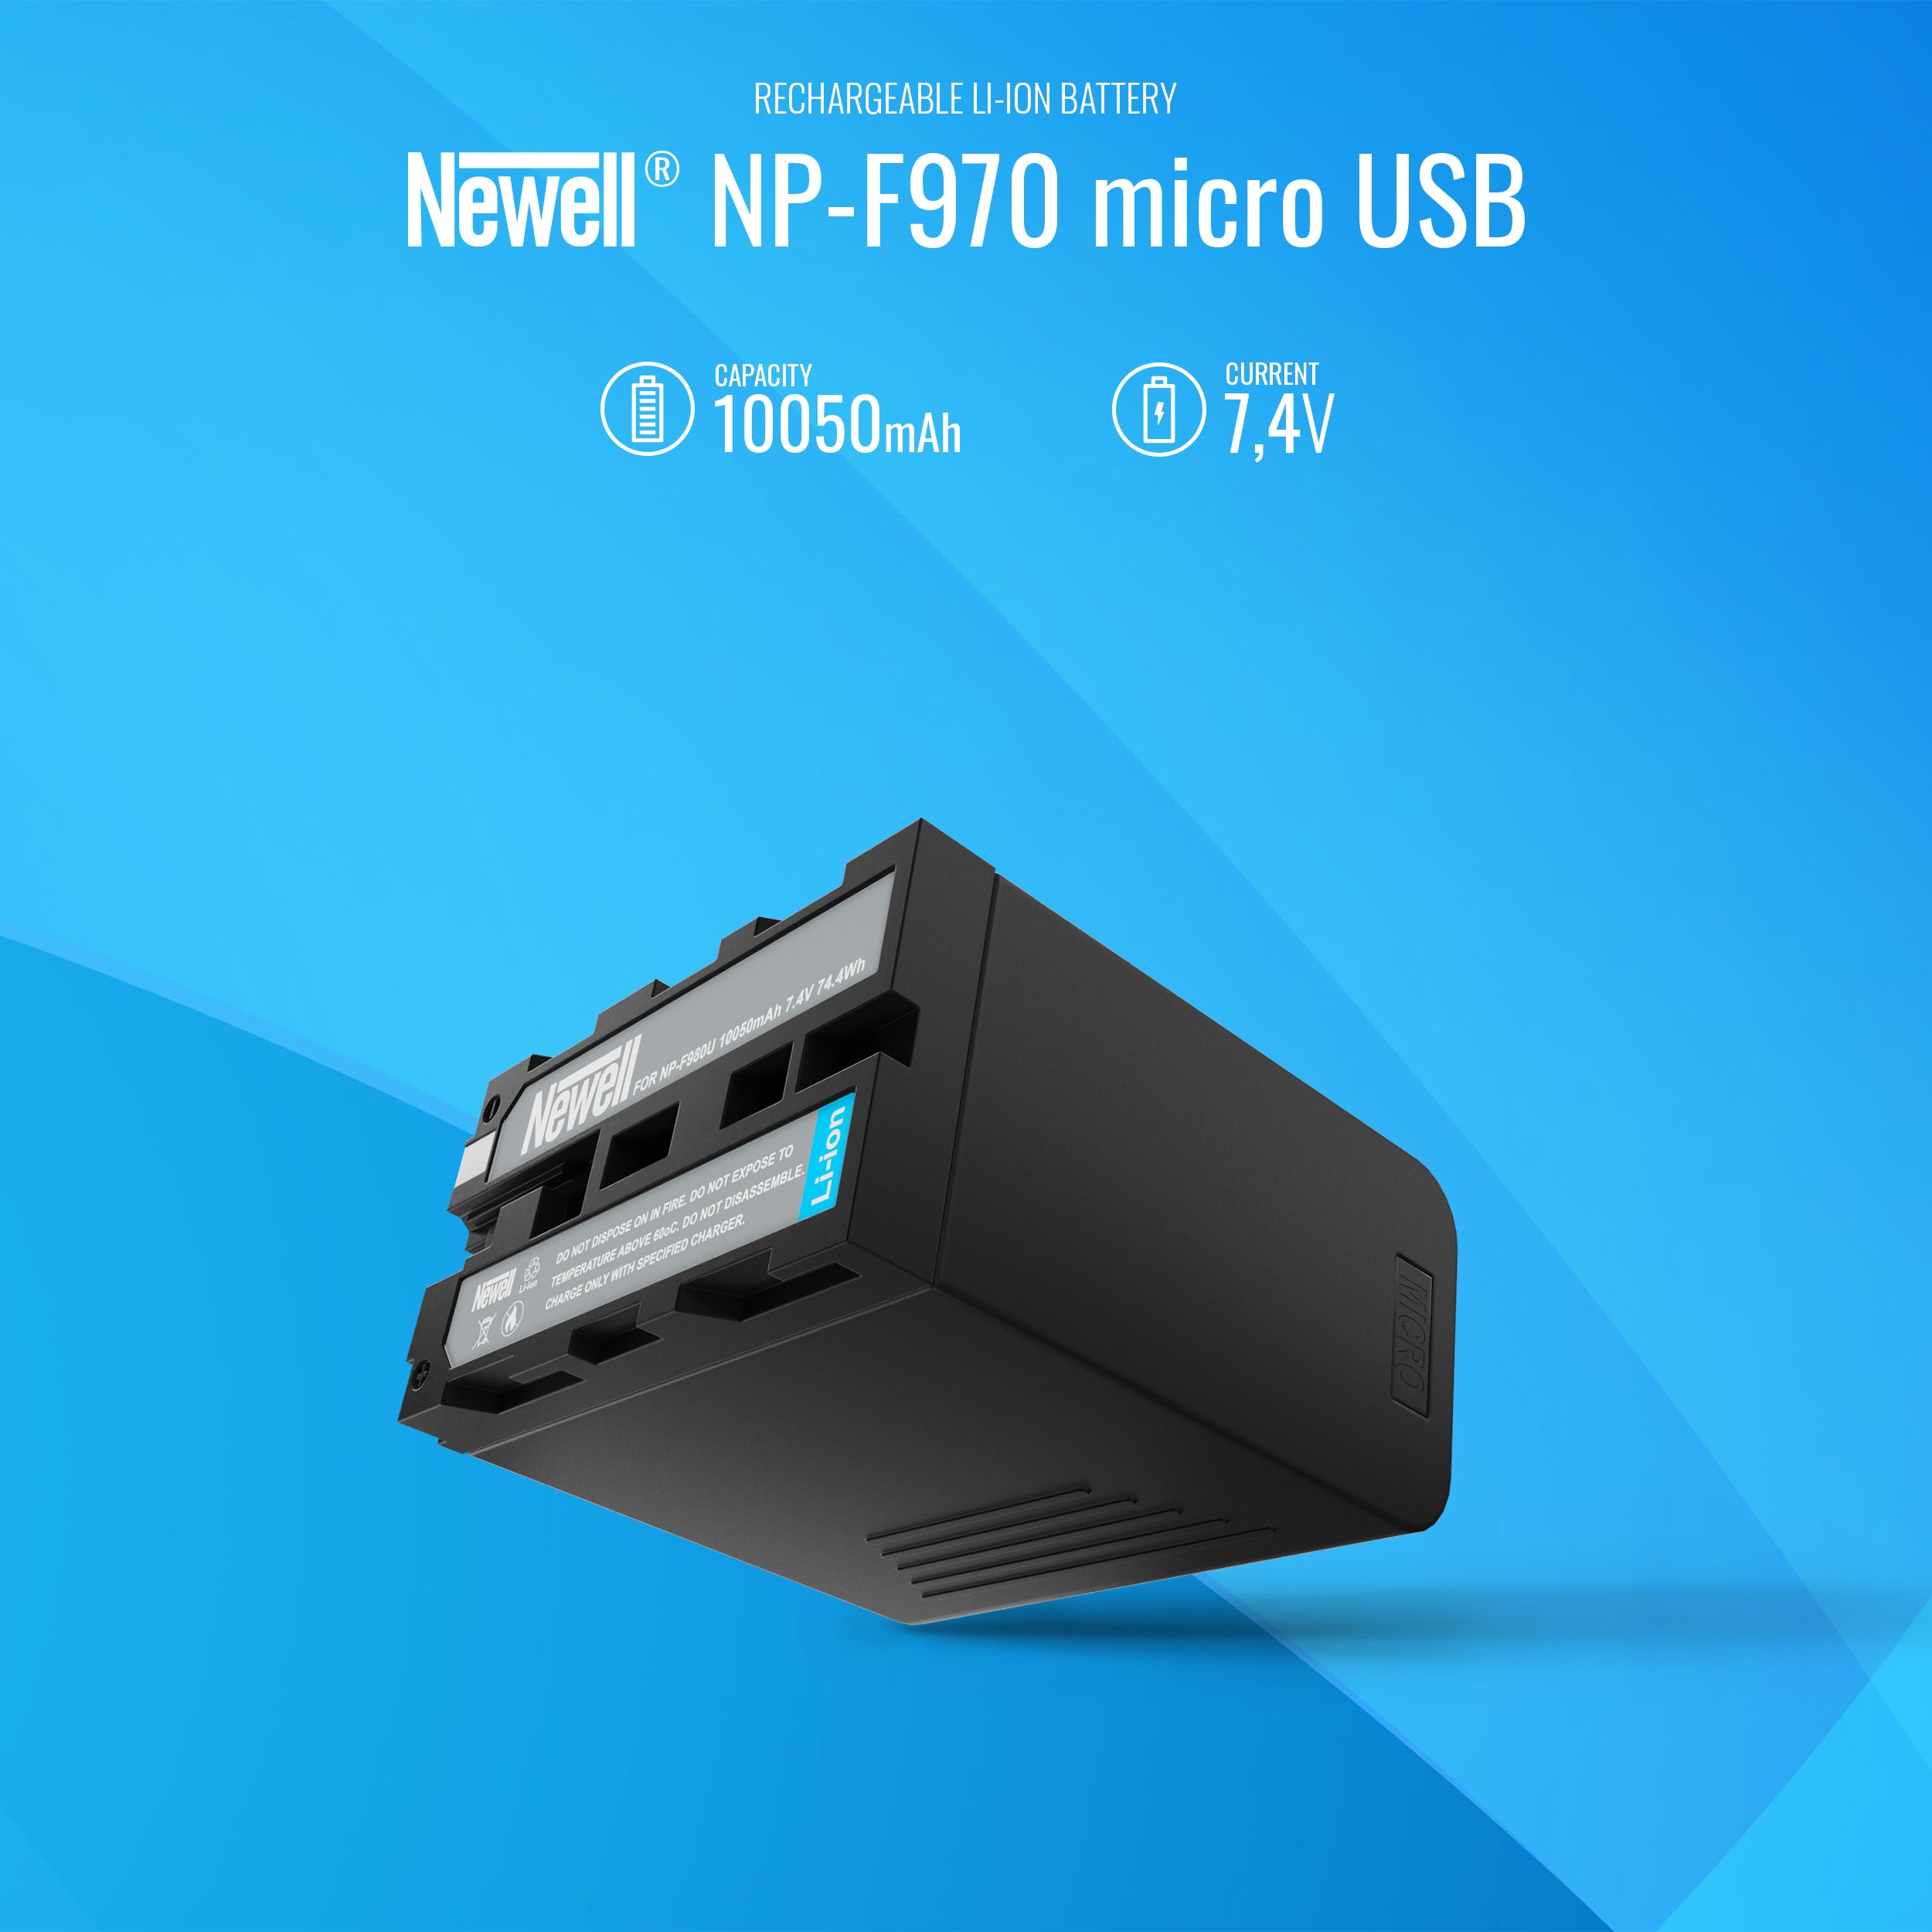 Newell rechargeable battery NP-F970 micro USB